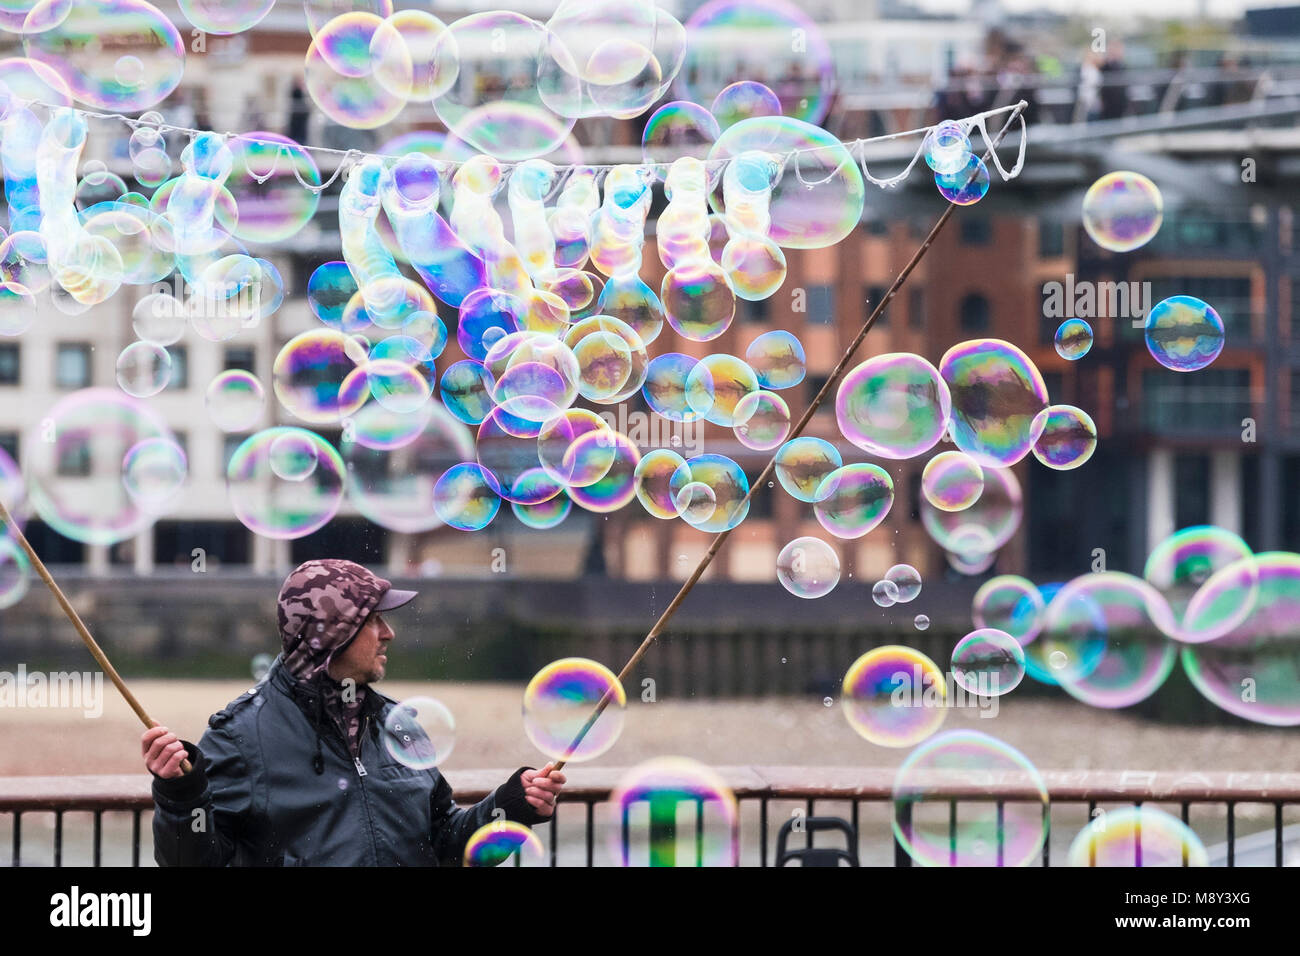 Bubbles created by a man on the South Bank in London. Stock Photo